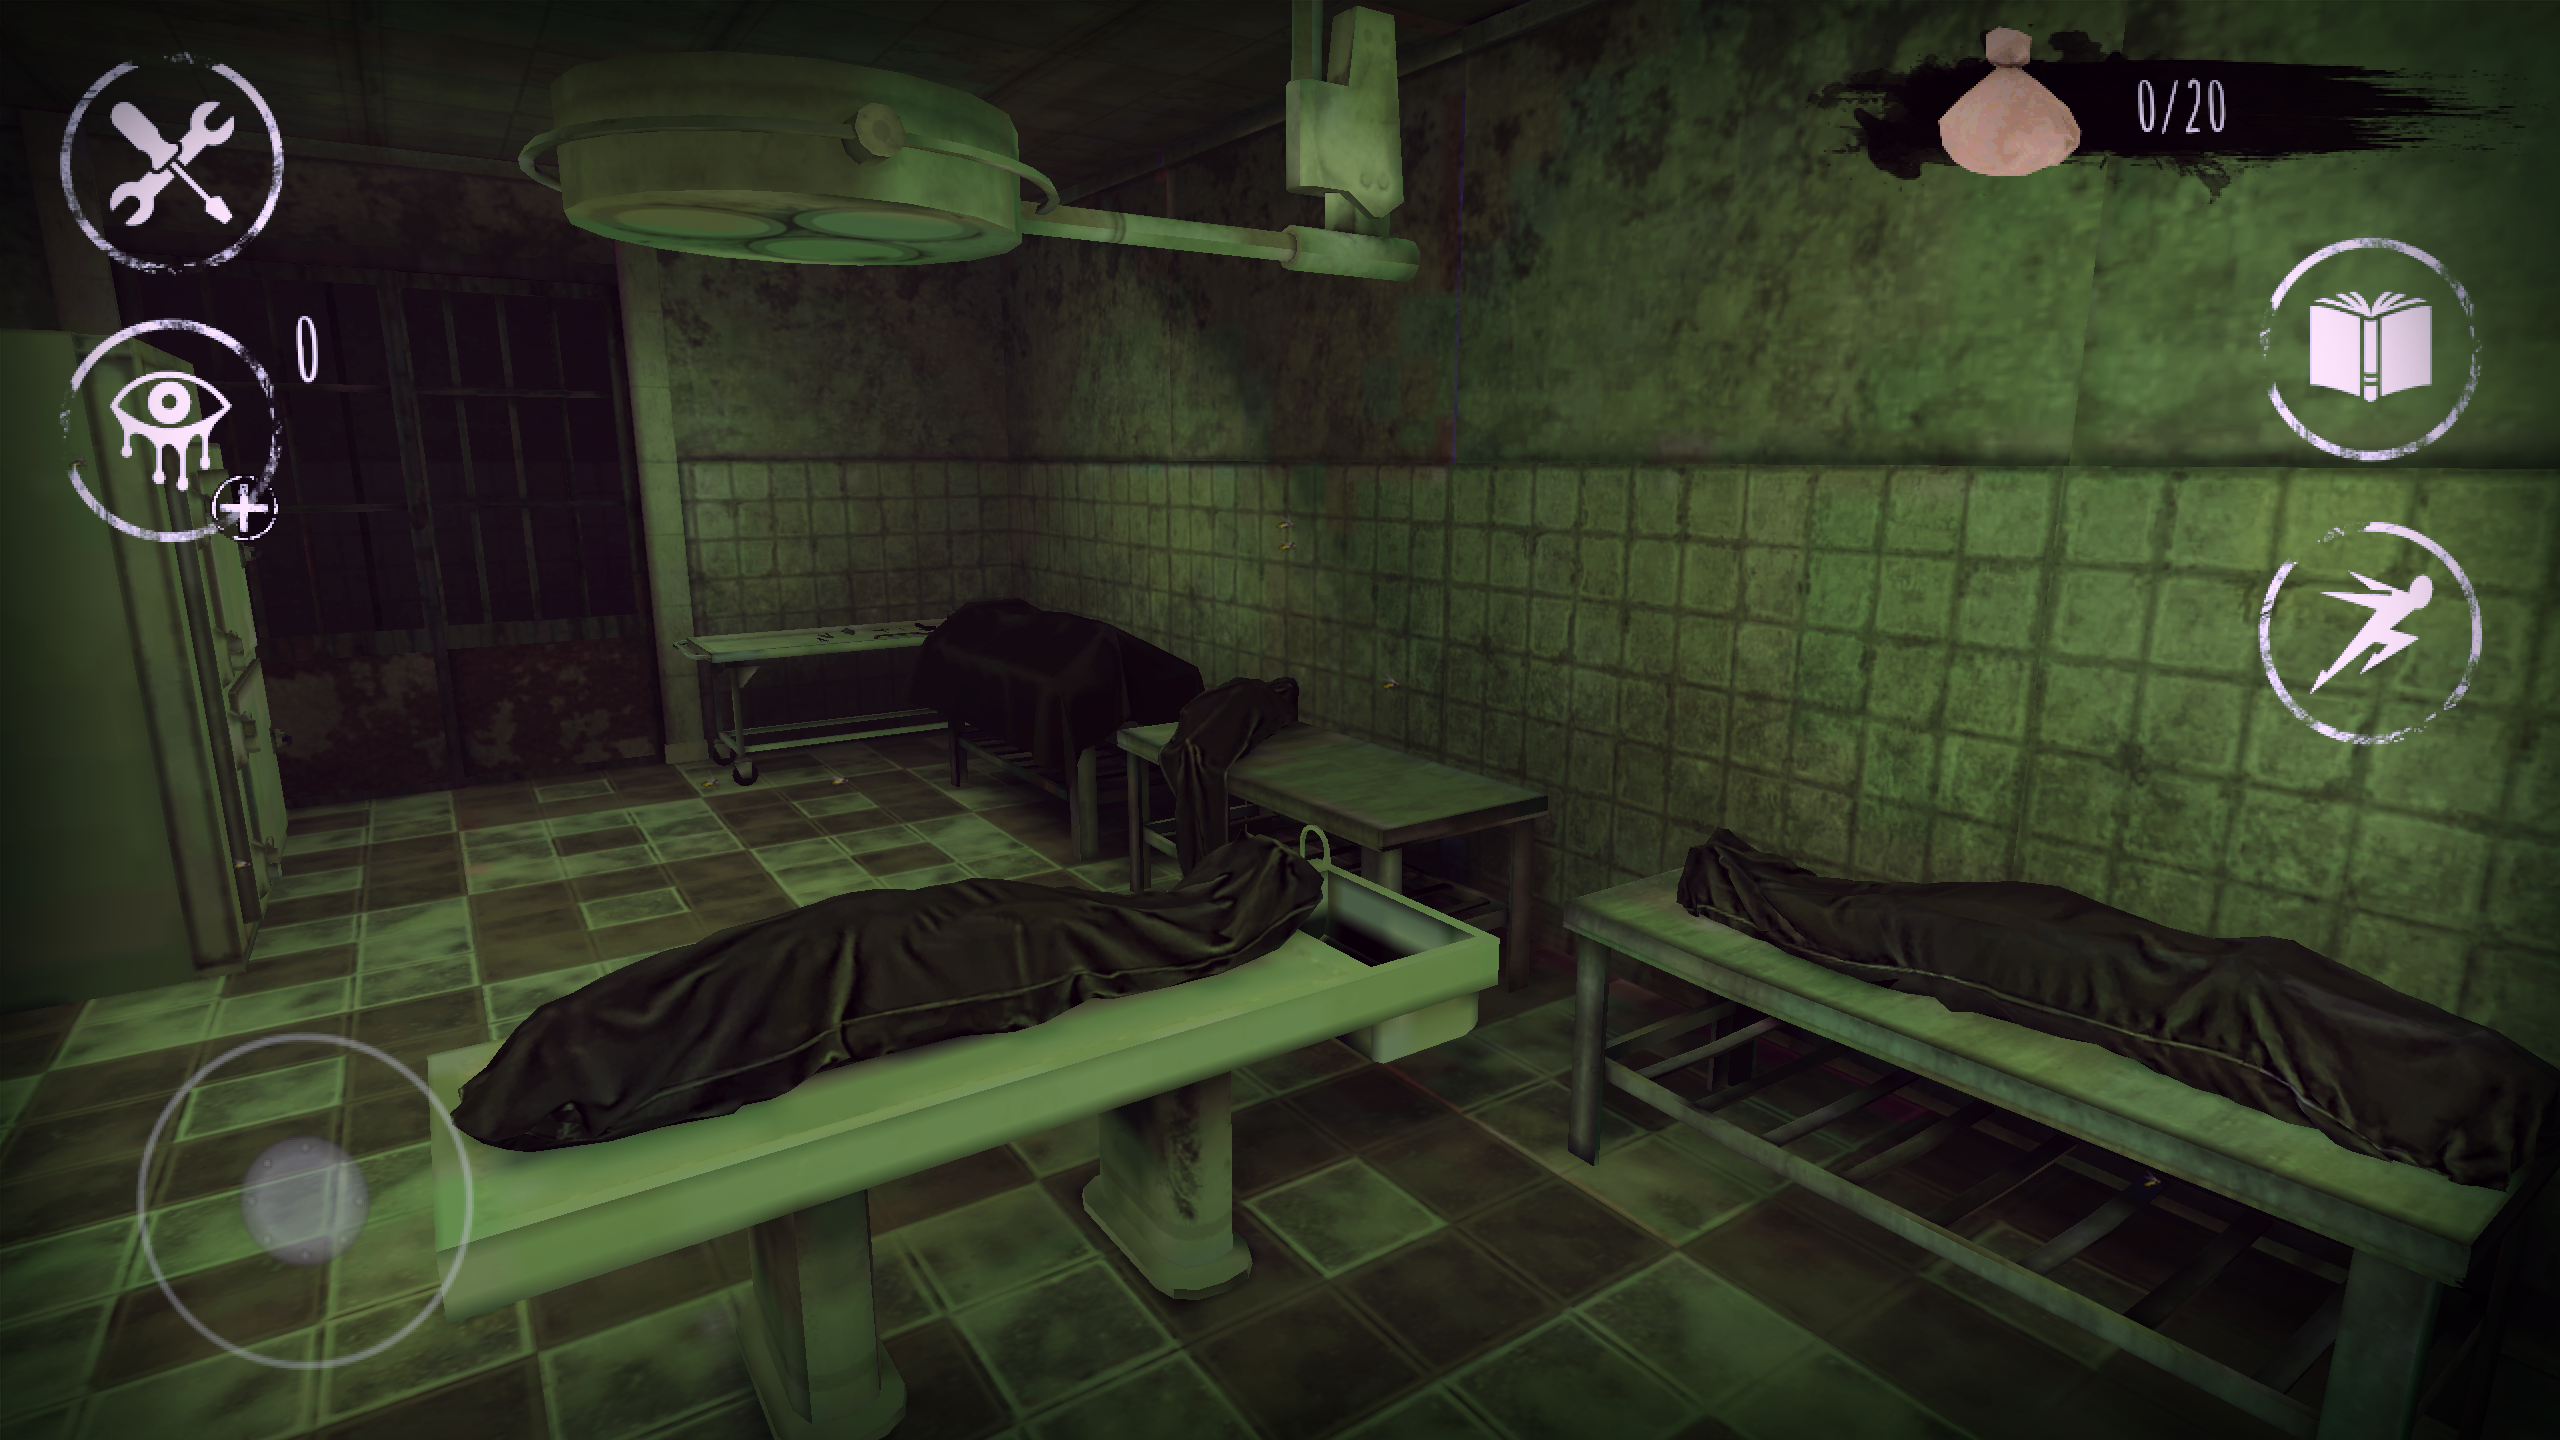 Eyes Scary Thriller Creepy Horror Game Apk 6 0 86 Download For